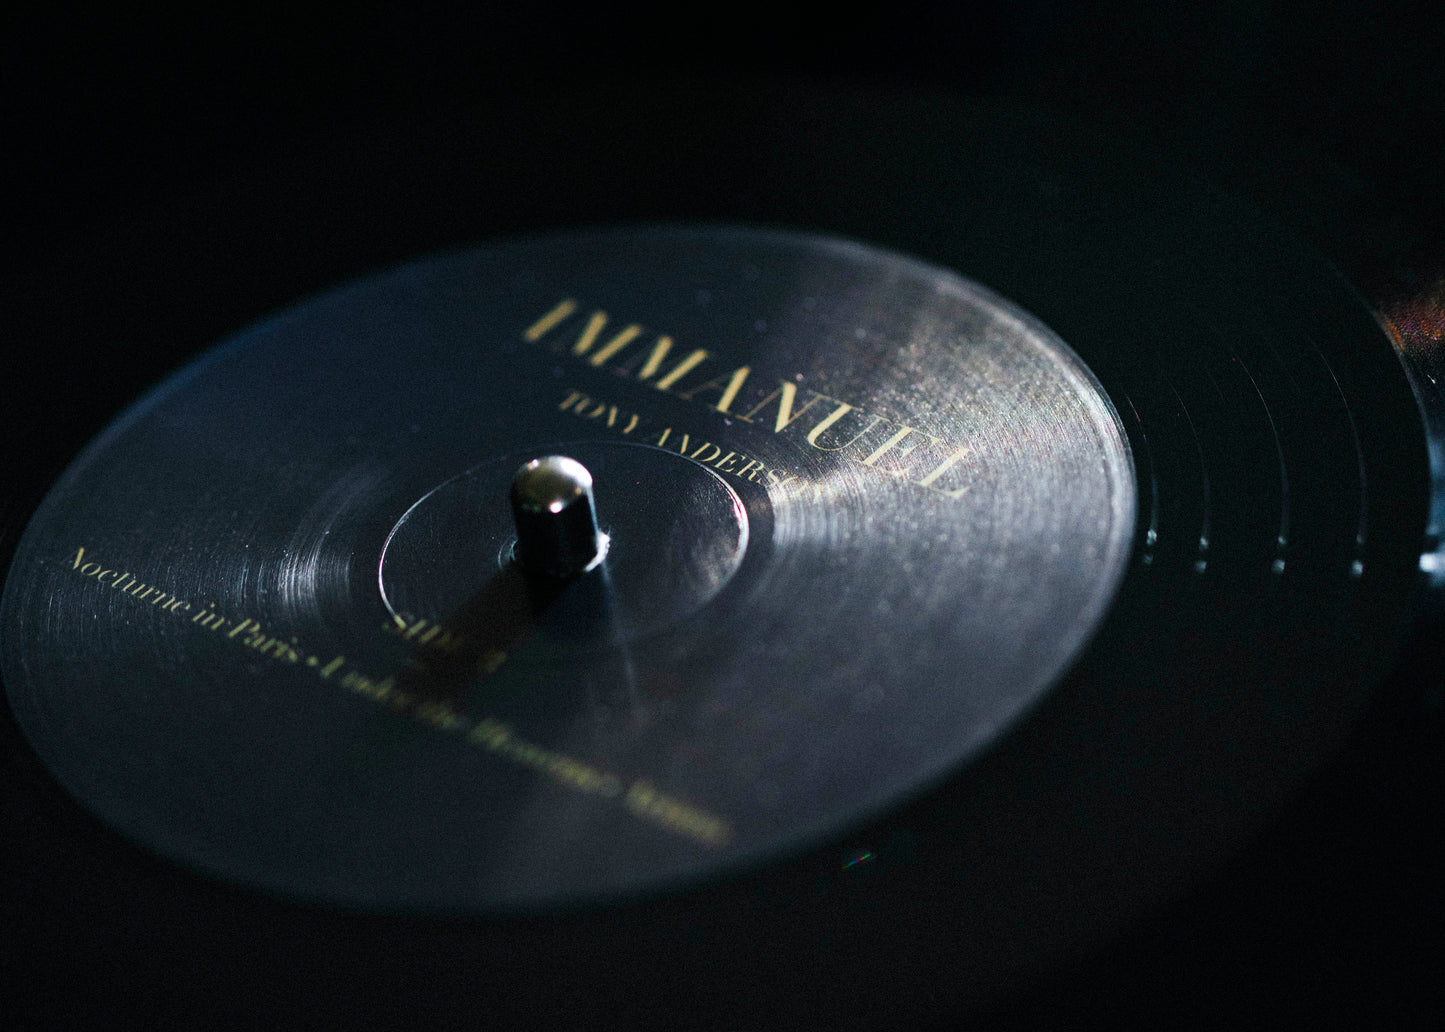 Immanuel Deluxe Limited Edition 12" Vinyl